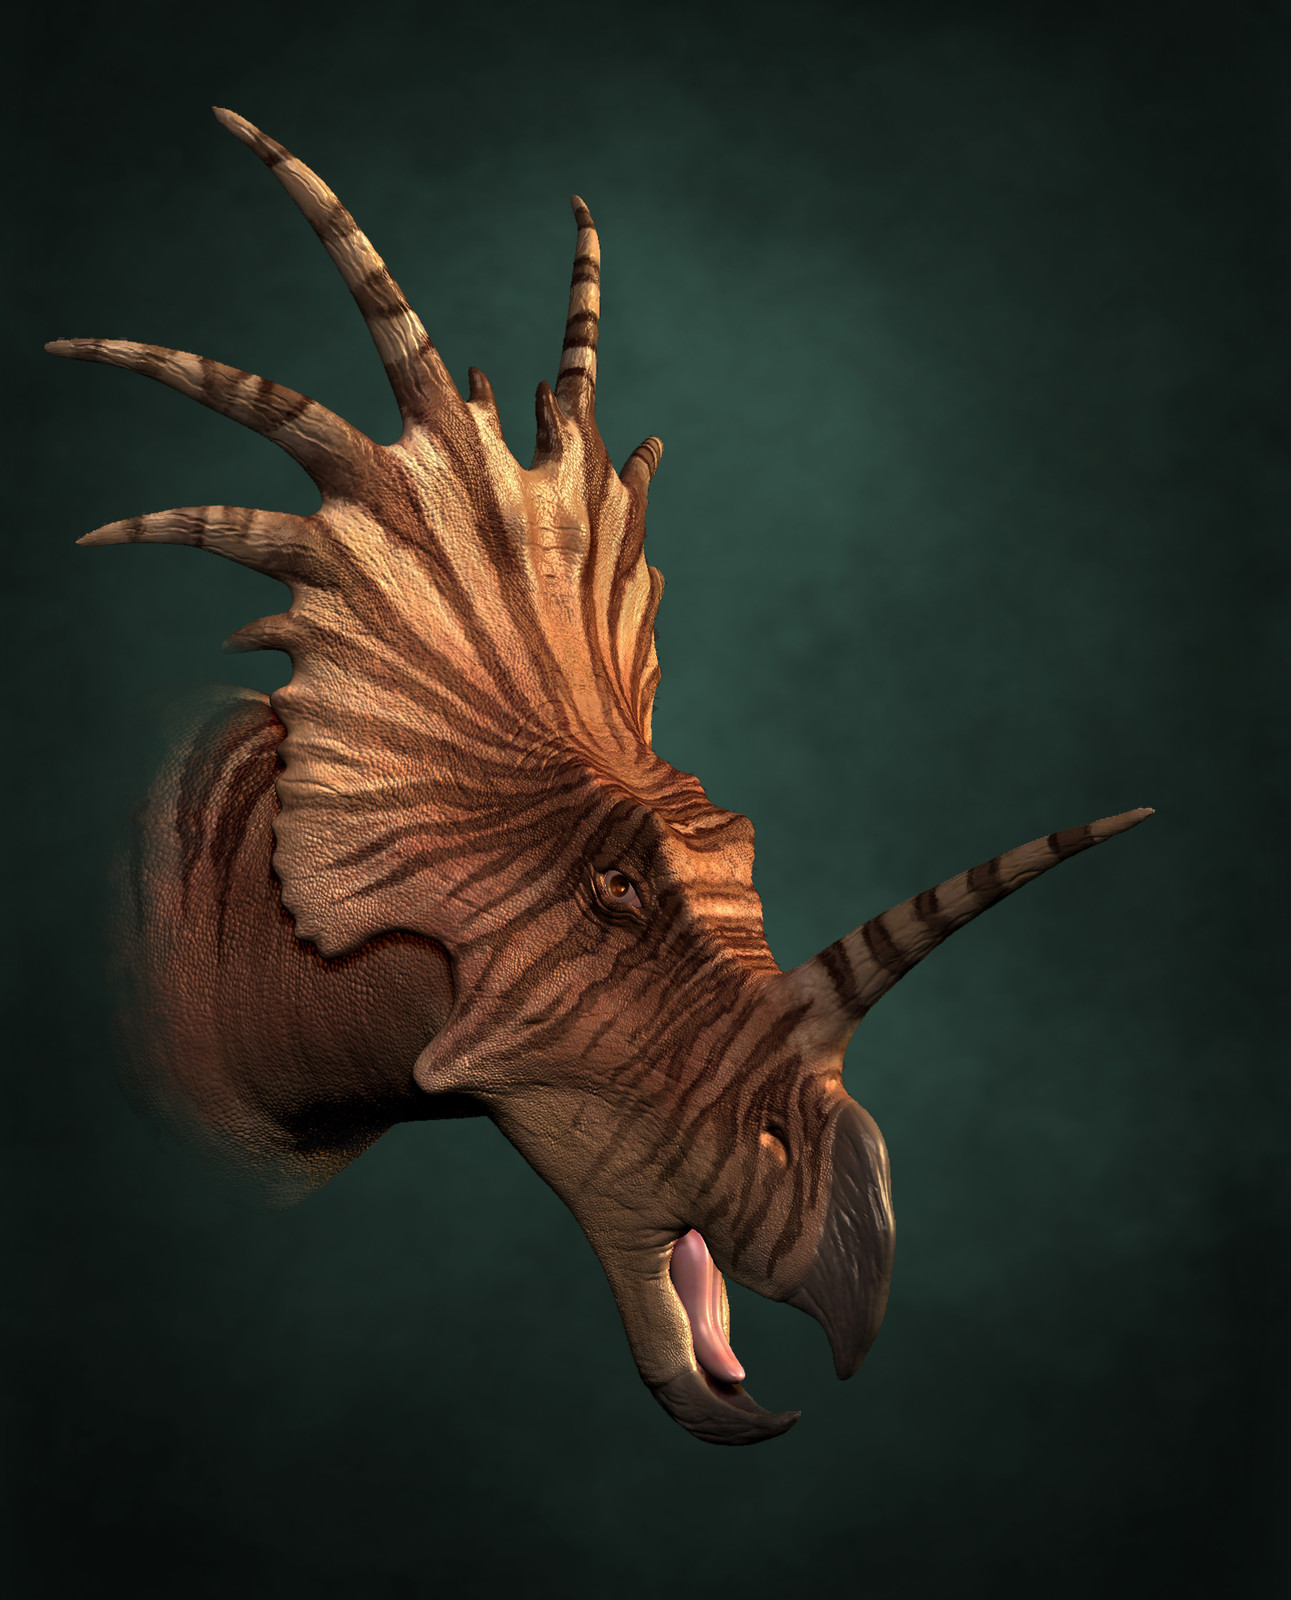 Decided to deviate from the prompts and go with one of my favs Styracosaurus. Ended up rushing this guy a bit but I am still satisfied with how this came out.